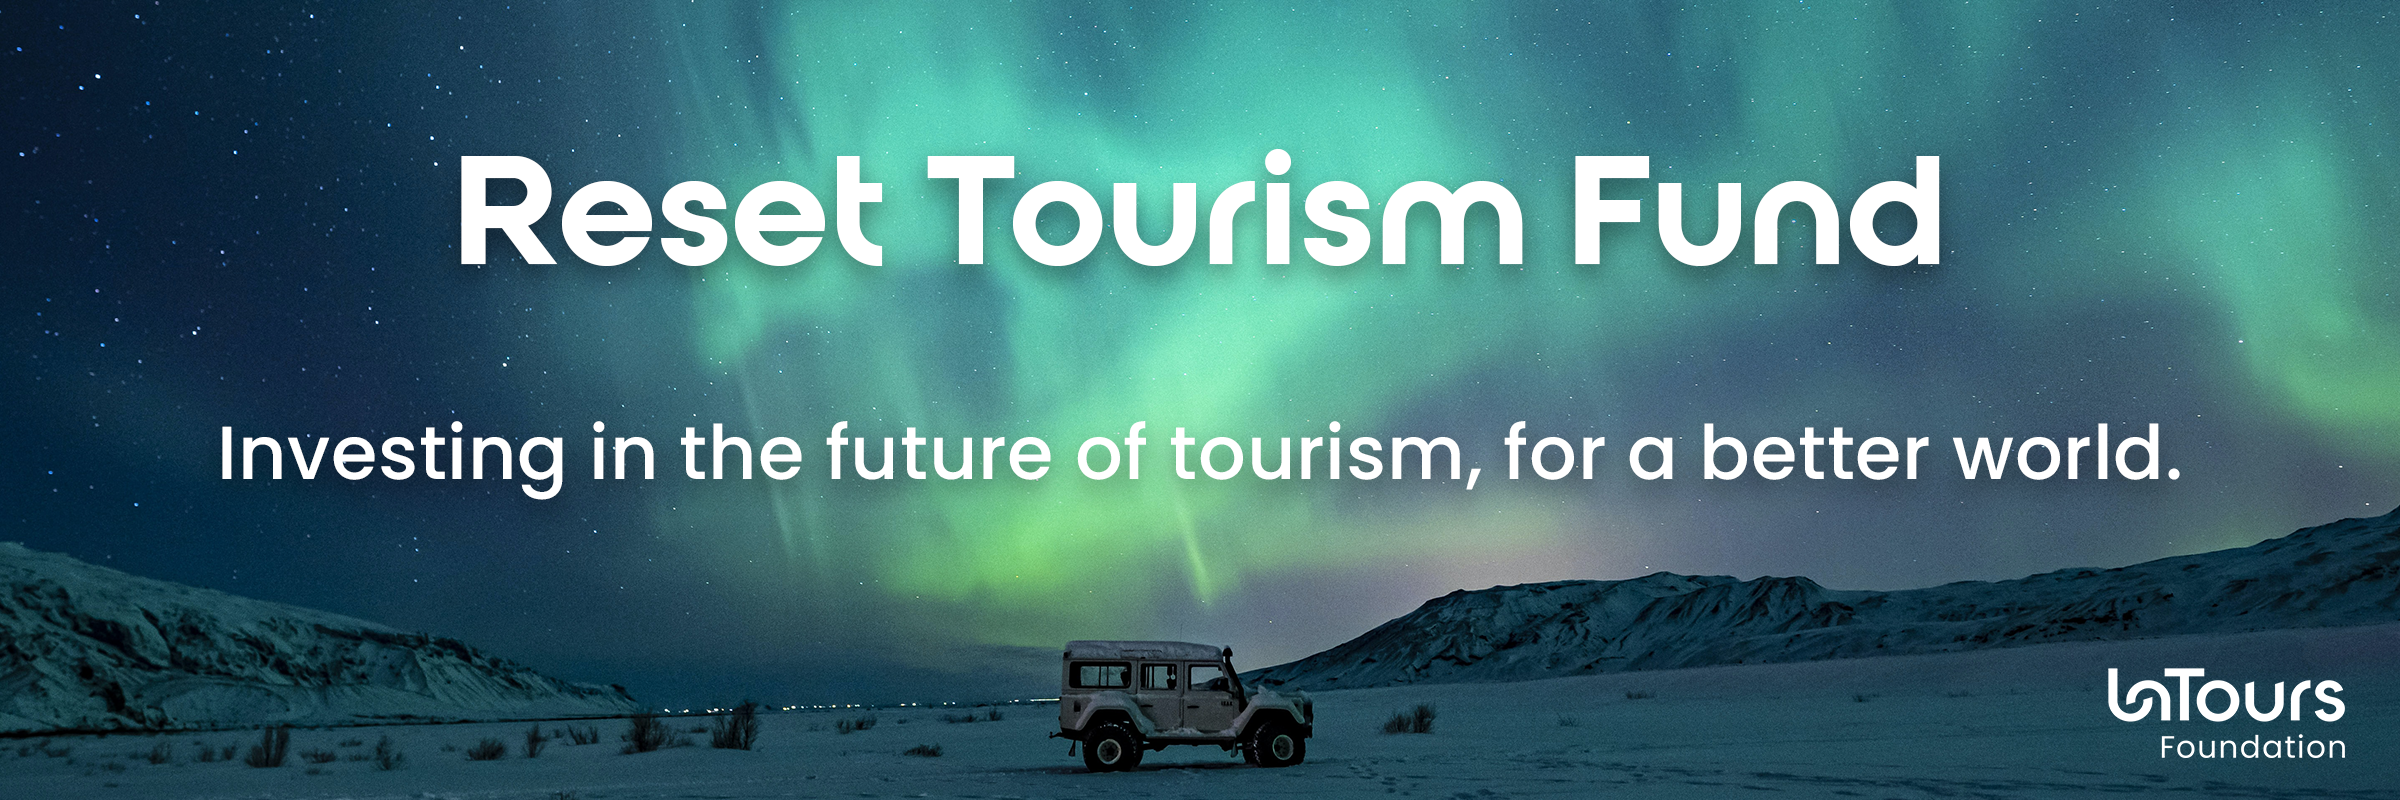 BANNER: Reset Tourism Fund - Investing in the future of tourism, for a better world.